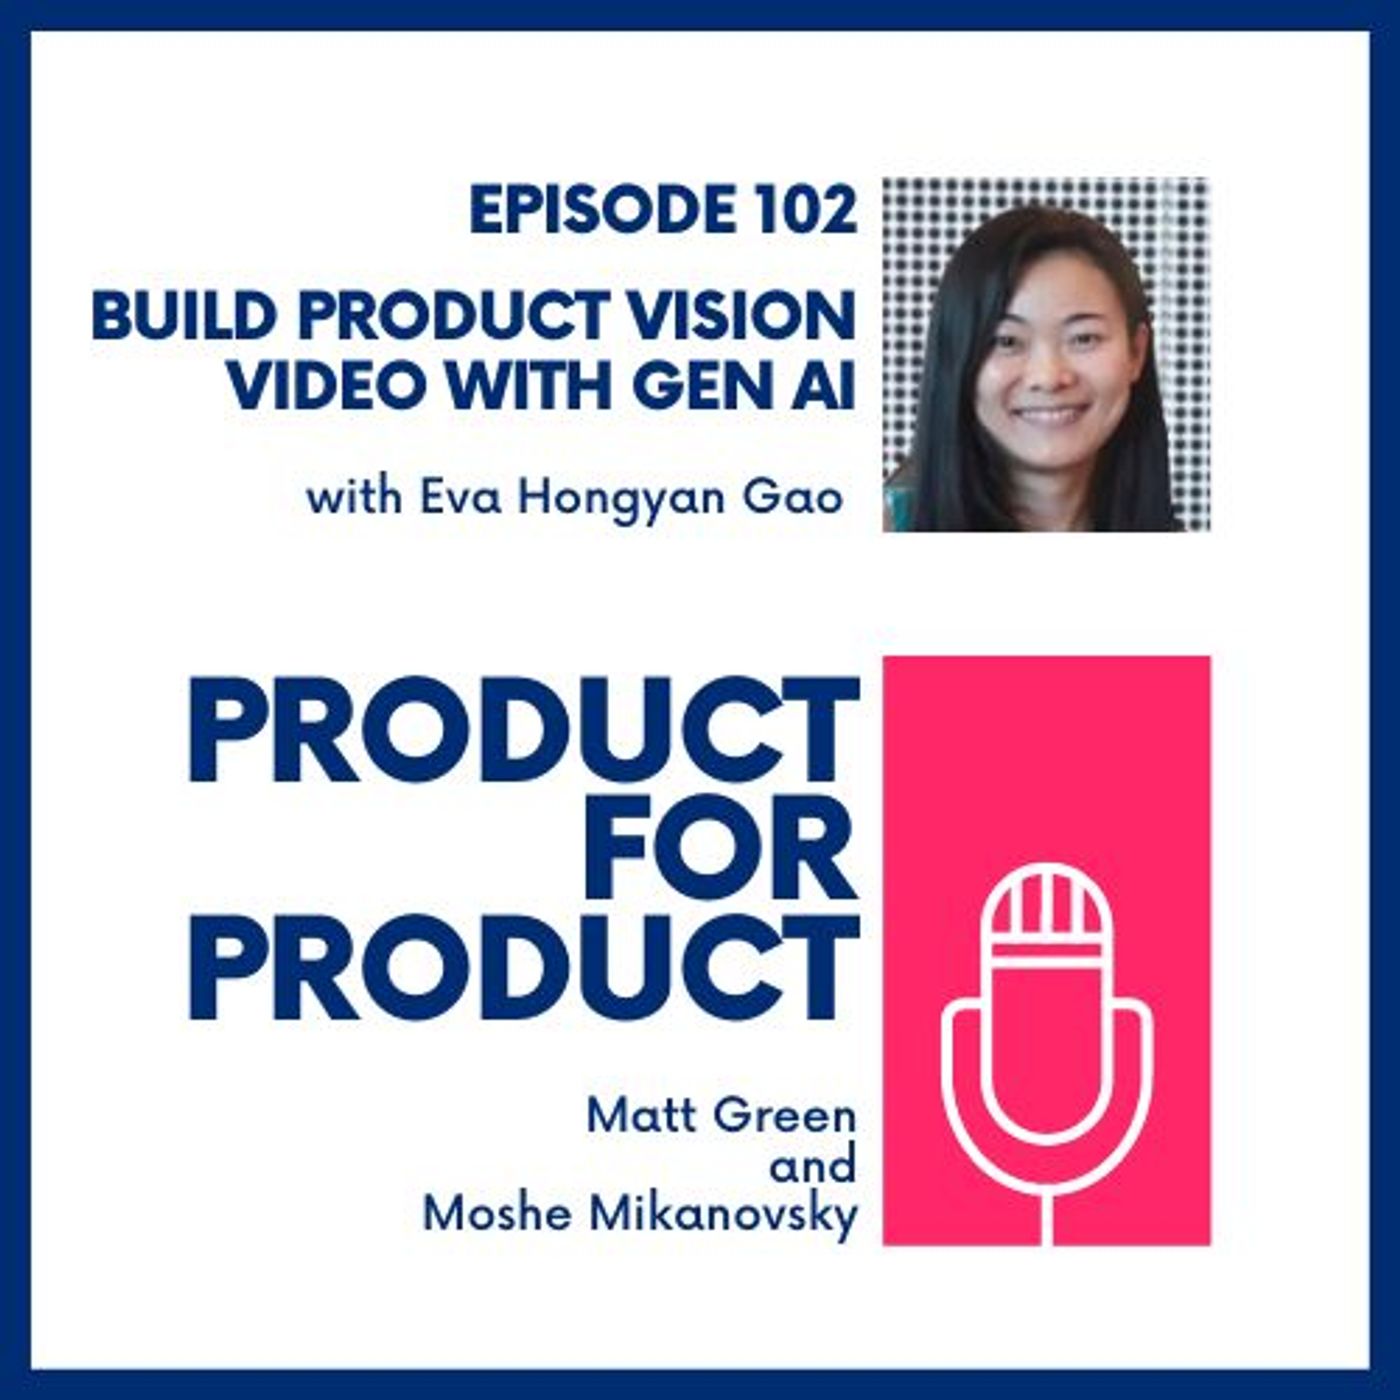 EP 102 - Gen AI Product Vision Video with Eva Gao